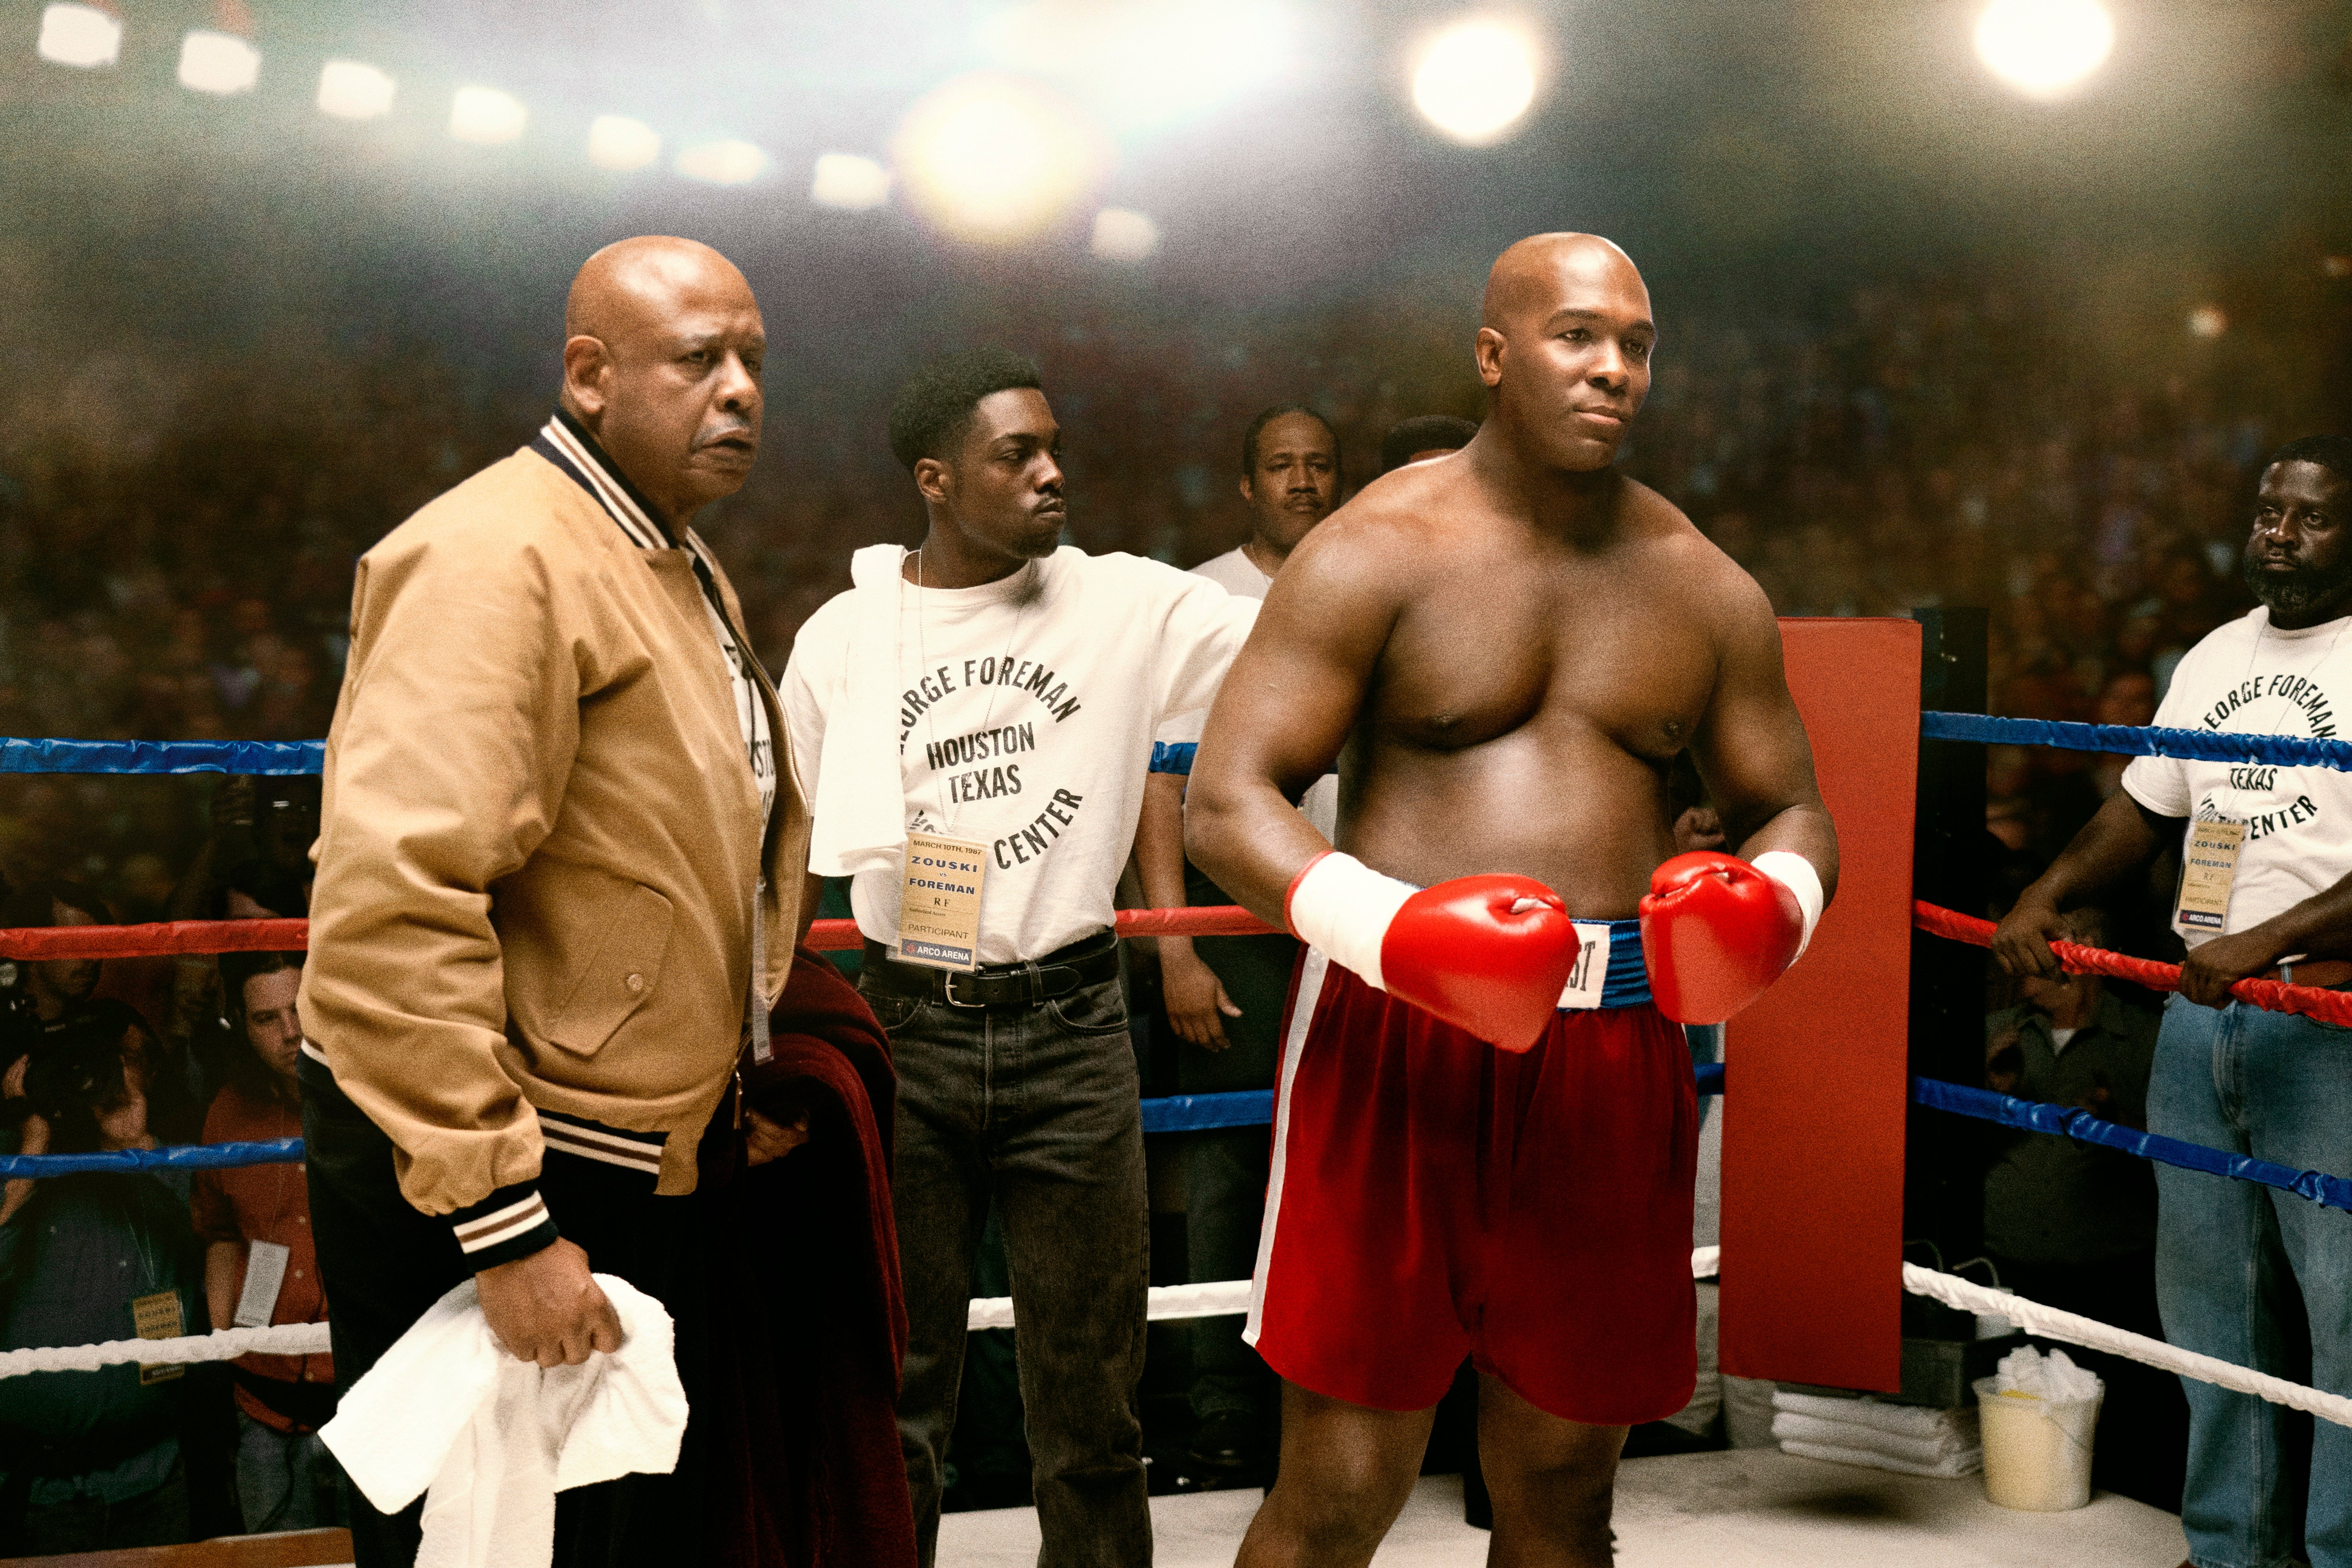 Big George Foreman' Trailer: Boxer Gets New Movie From Sony